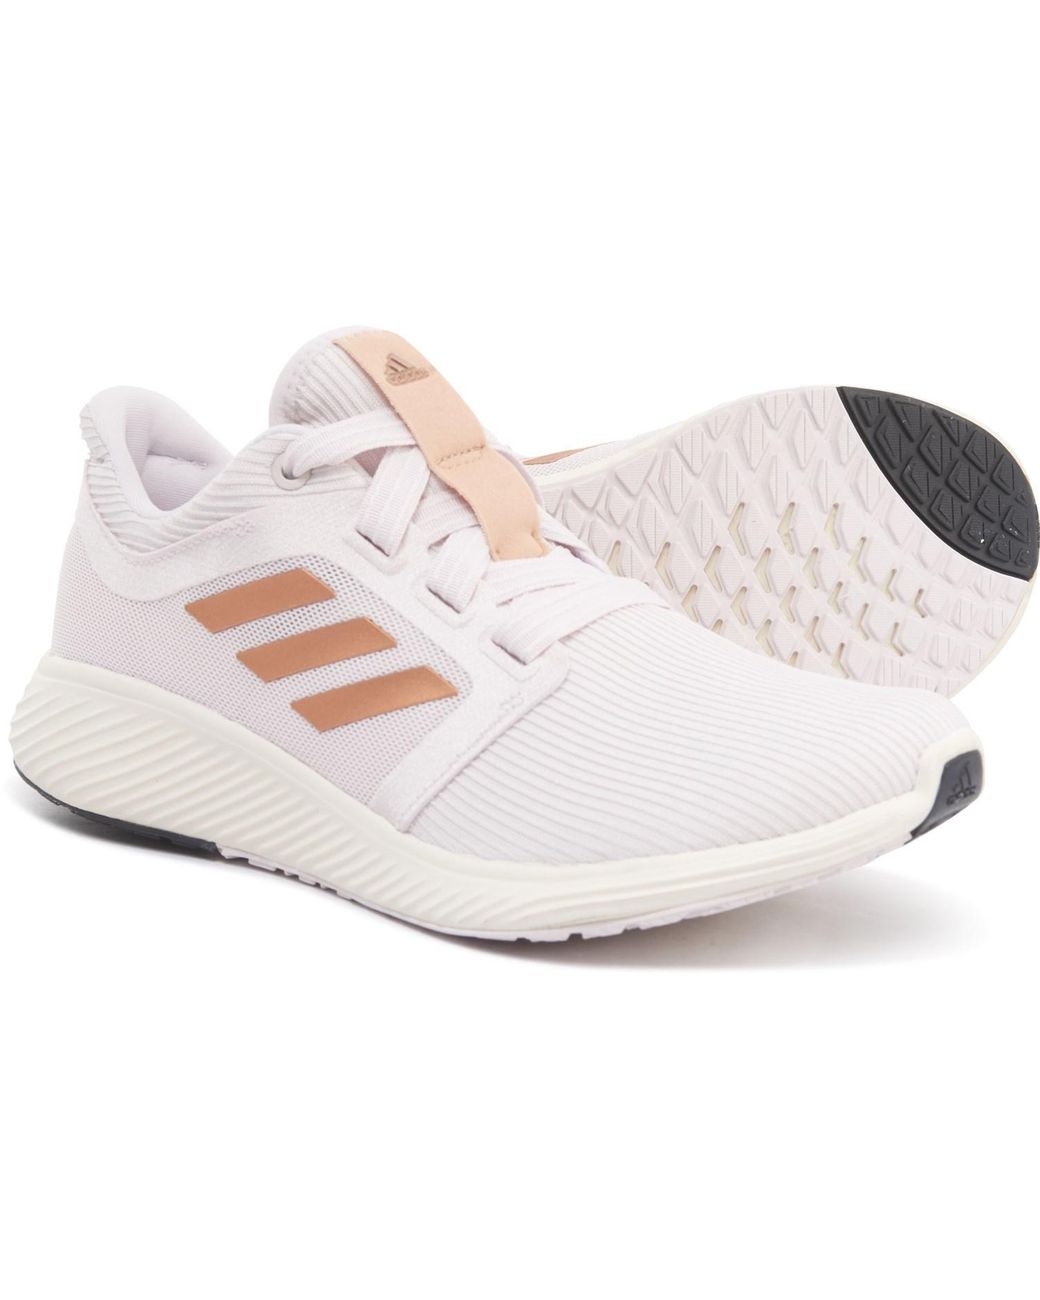 white rose gold adidas shoes